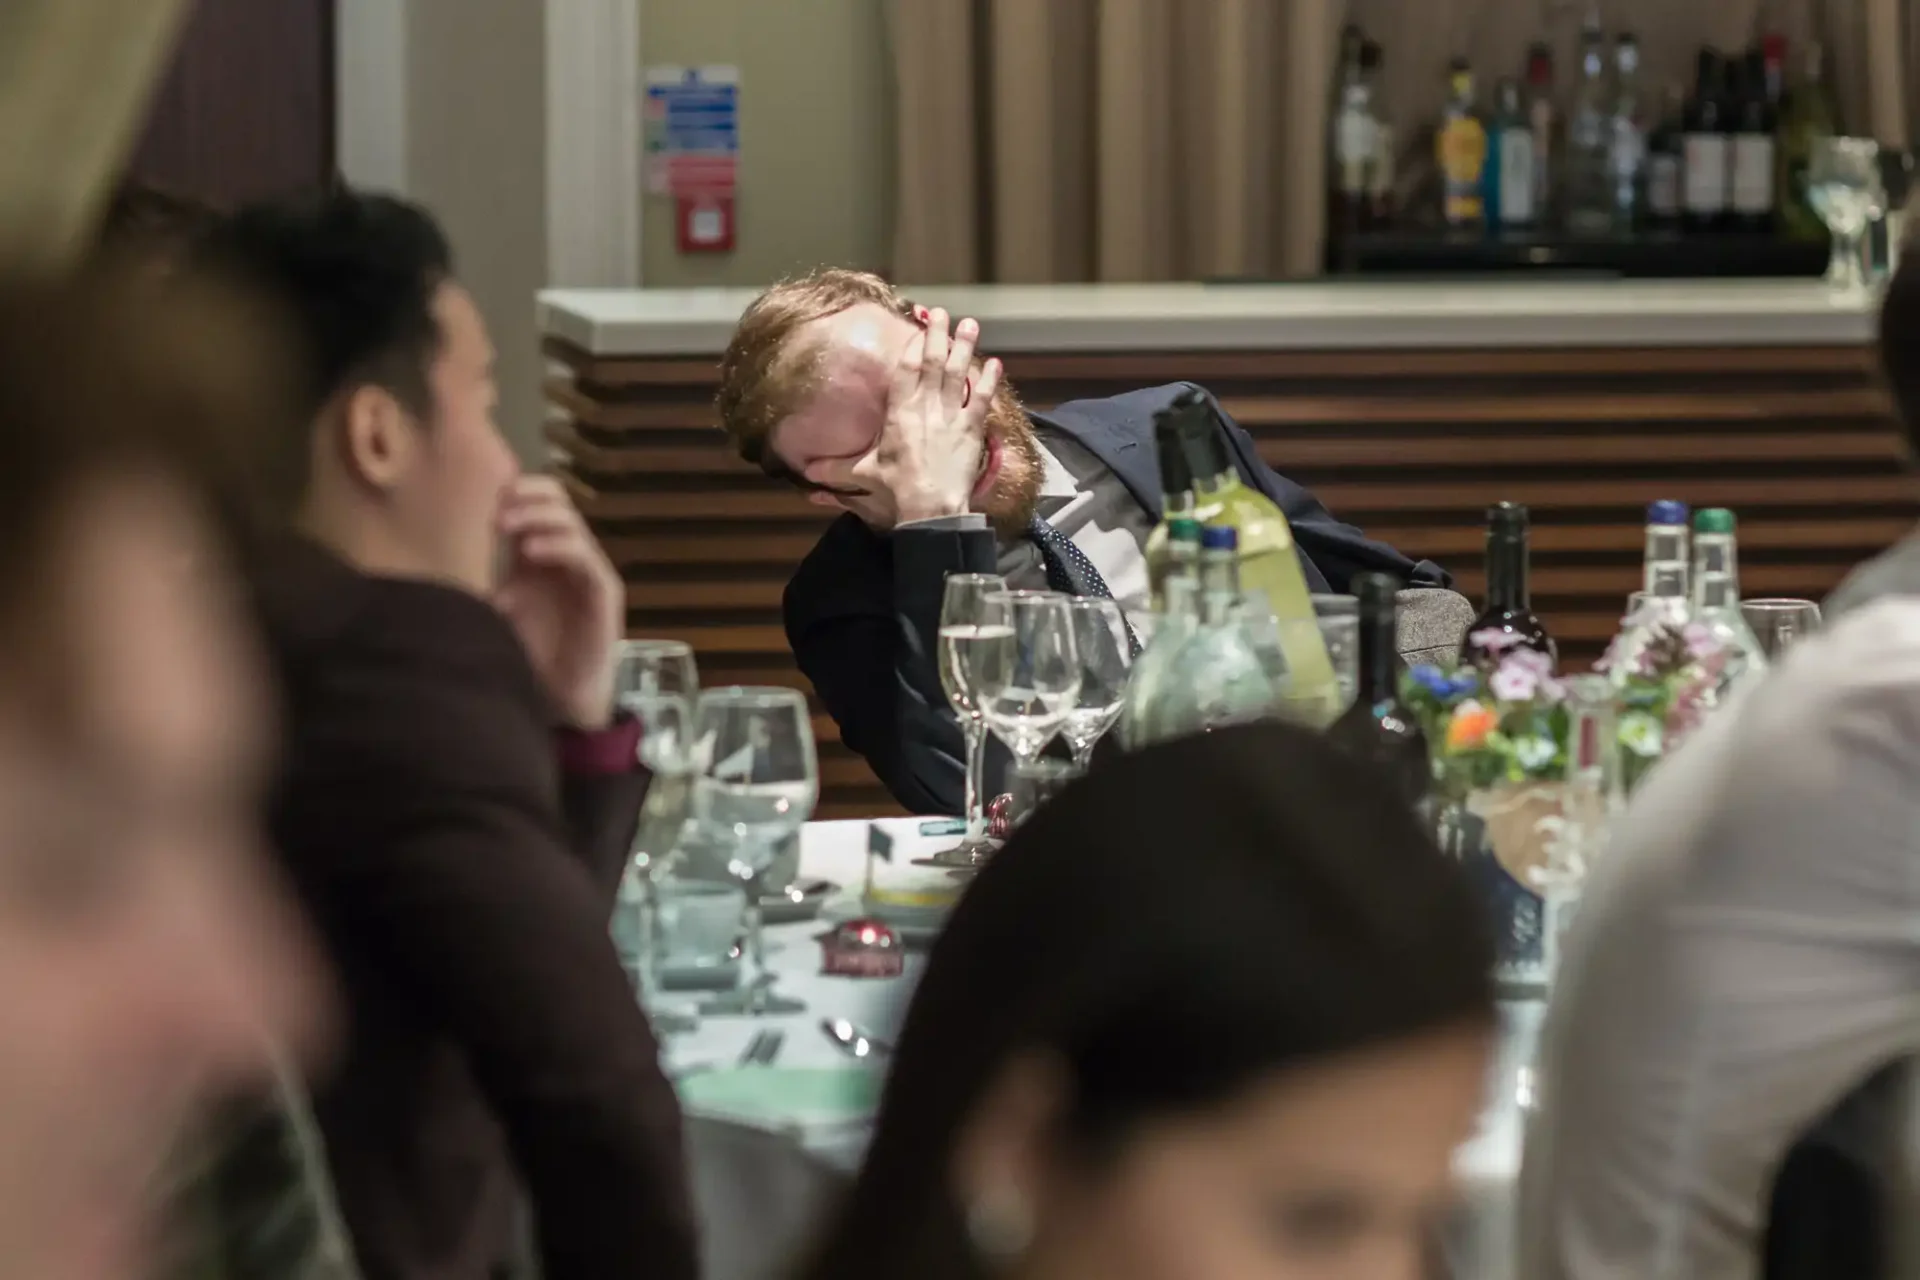 A man with a beard resting his head on his hand appears to be asleep or fatigued at a busy dinner event.